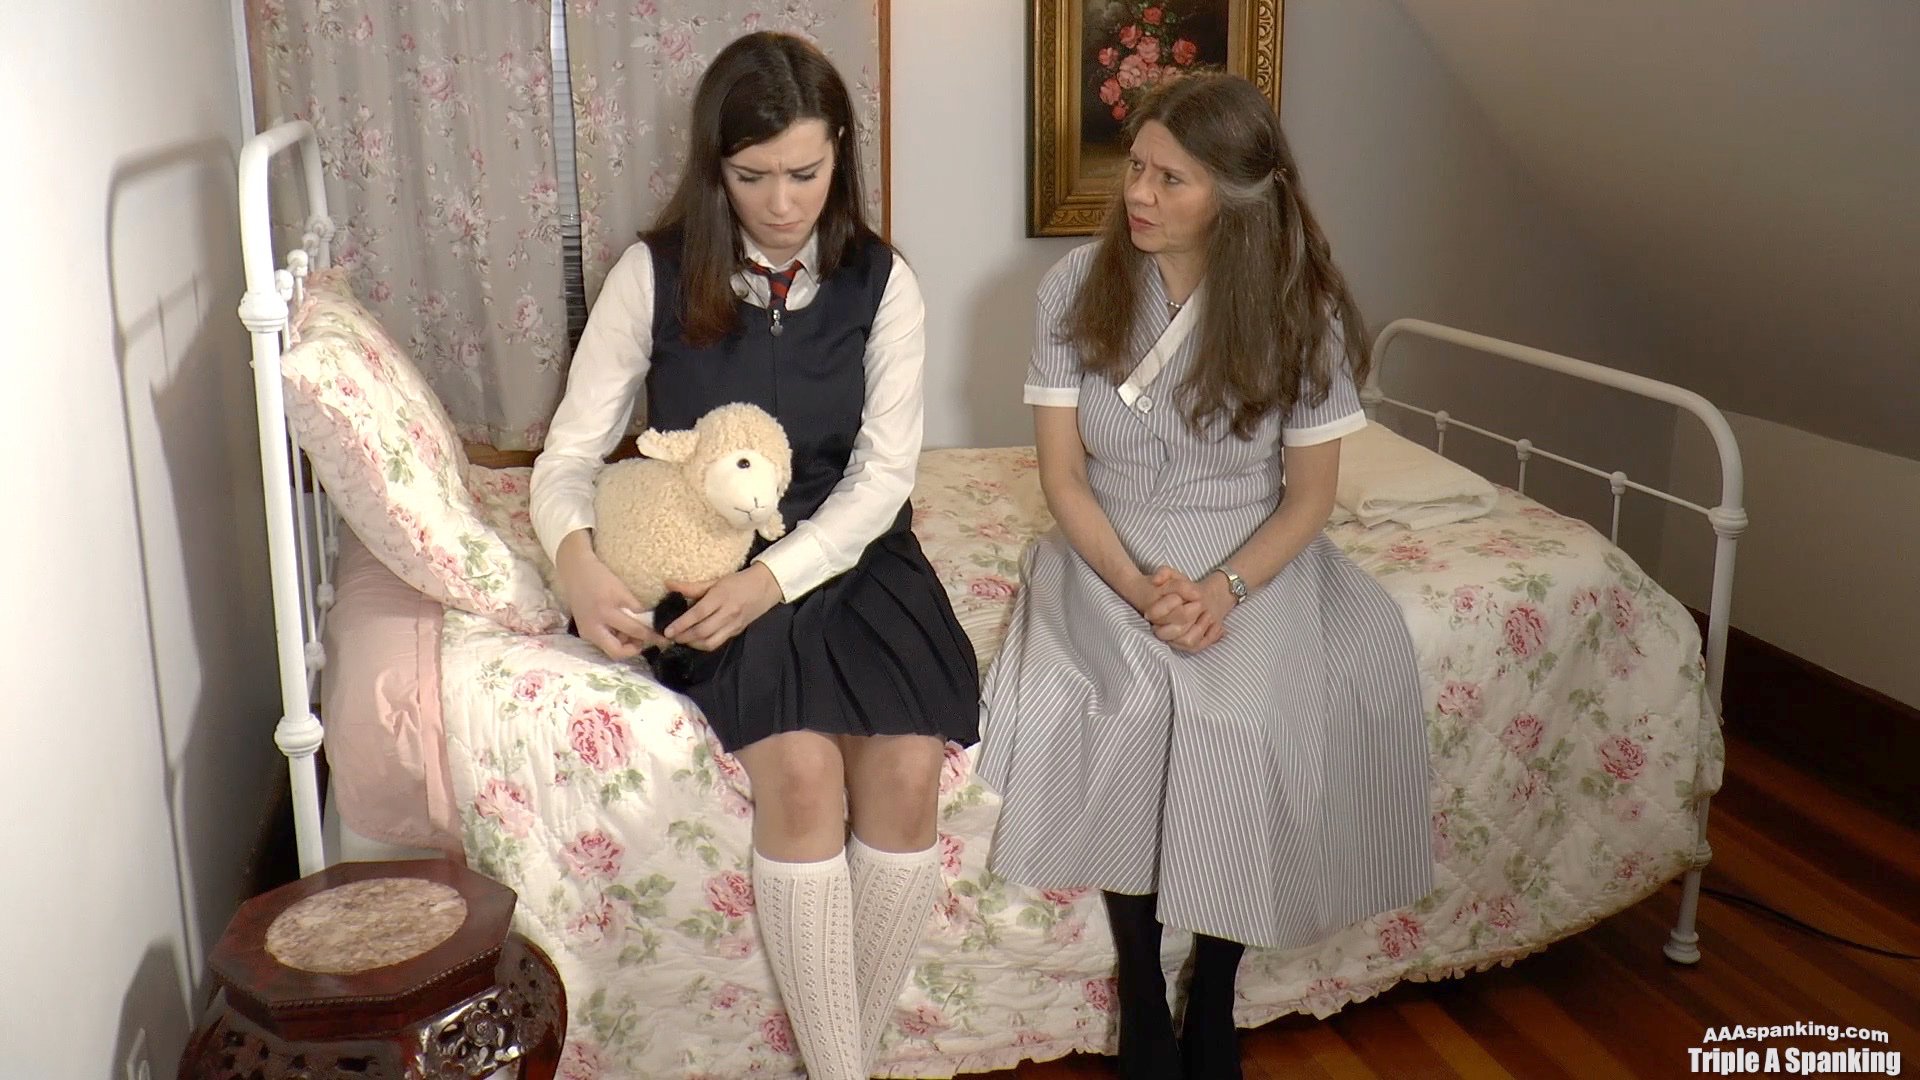 “Just edited this fabulous film introducing new #spanking model from the #a...